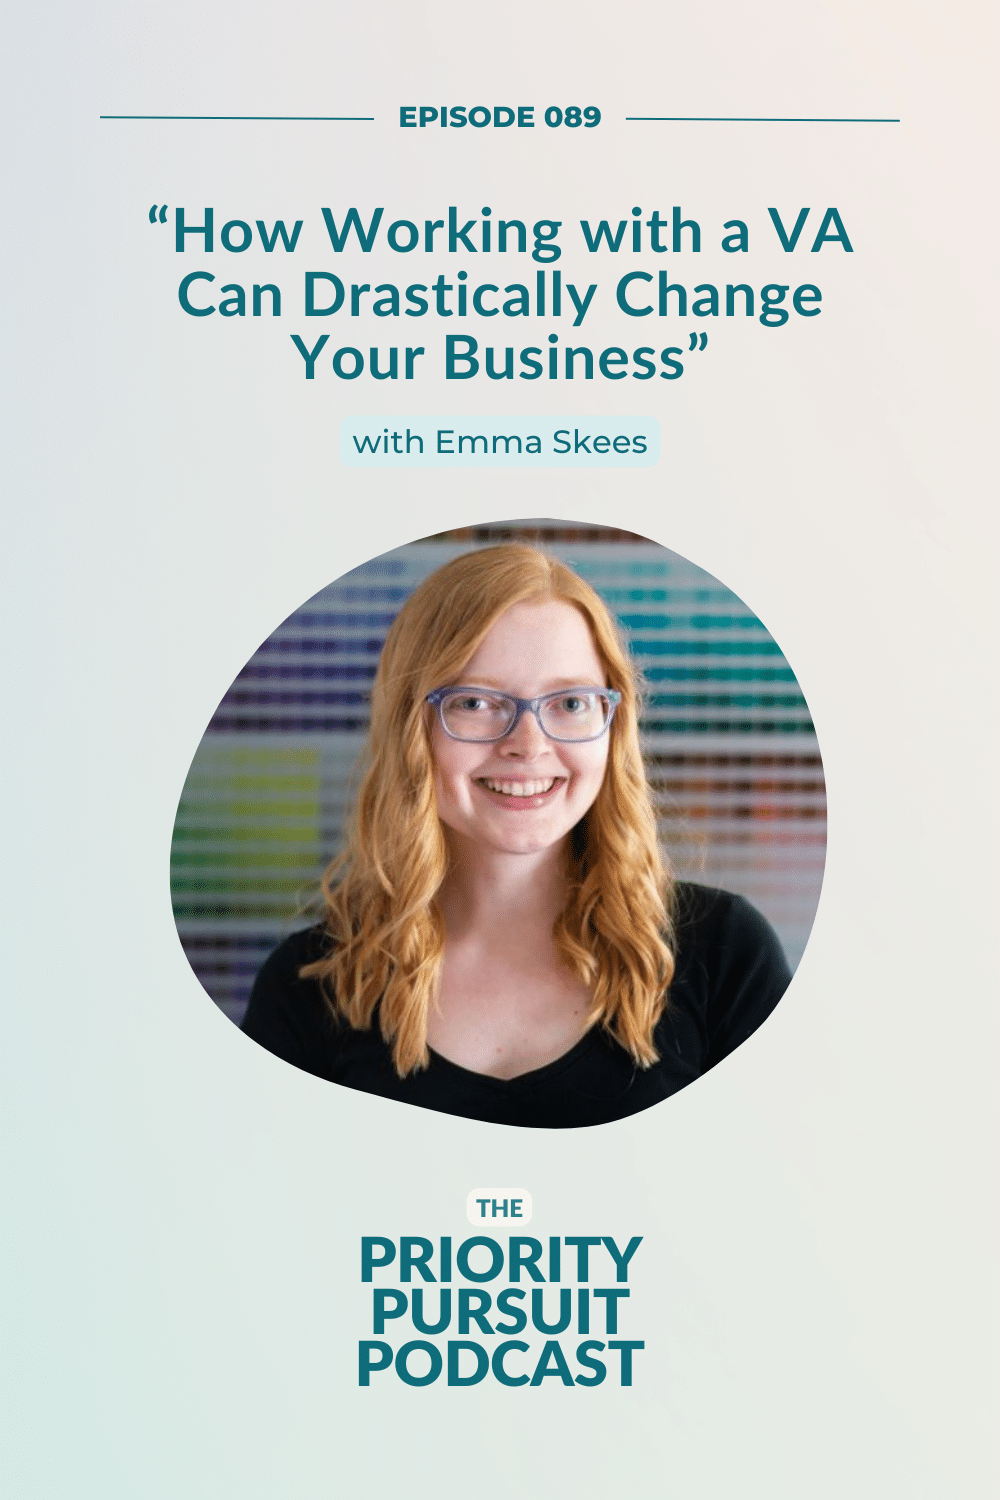 Emma Skees explains how a virtual assistant can support your small business on the Priority Pursuit Podcast.